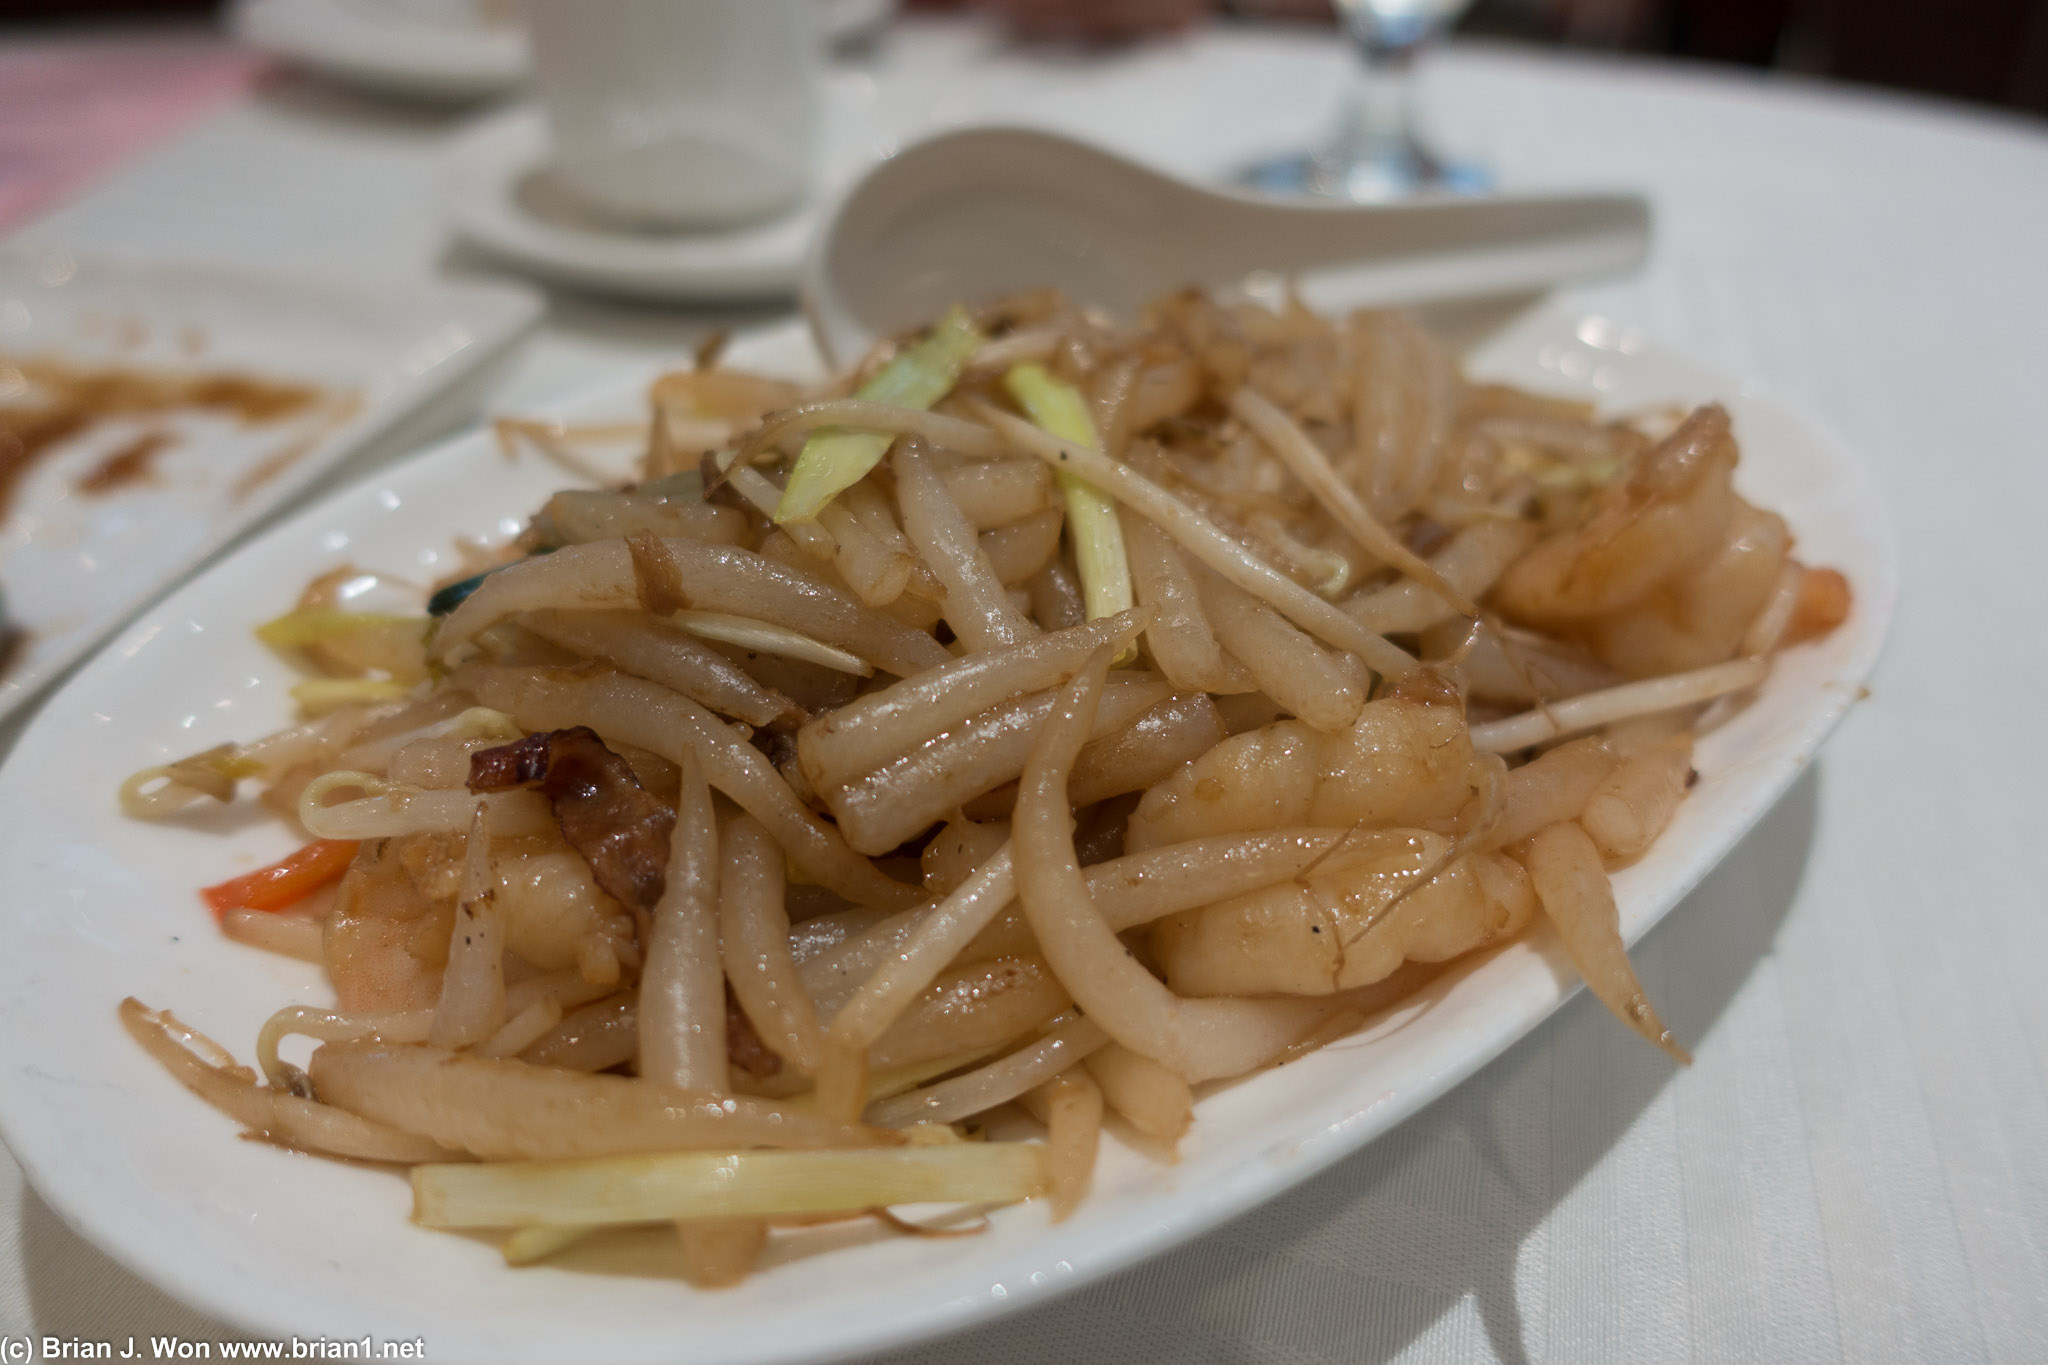 Some rice noodle thing. Not sure what it's called.